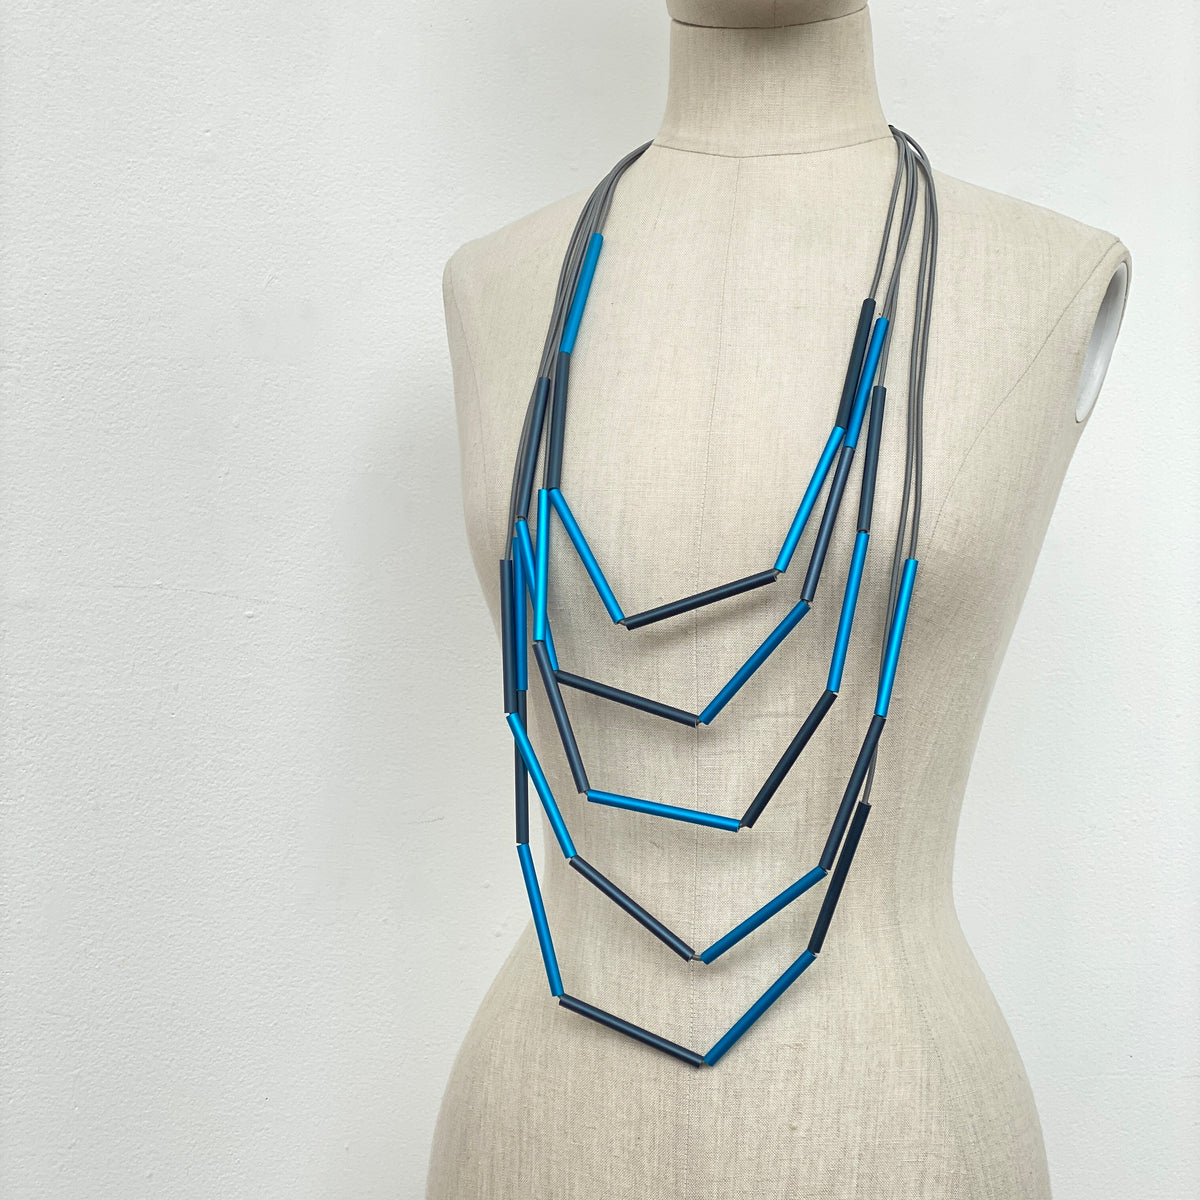 CB159 - Long Multi-Tube Necklace in Bluemix